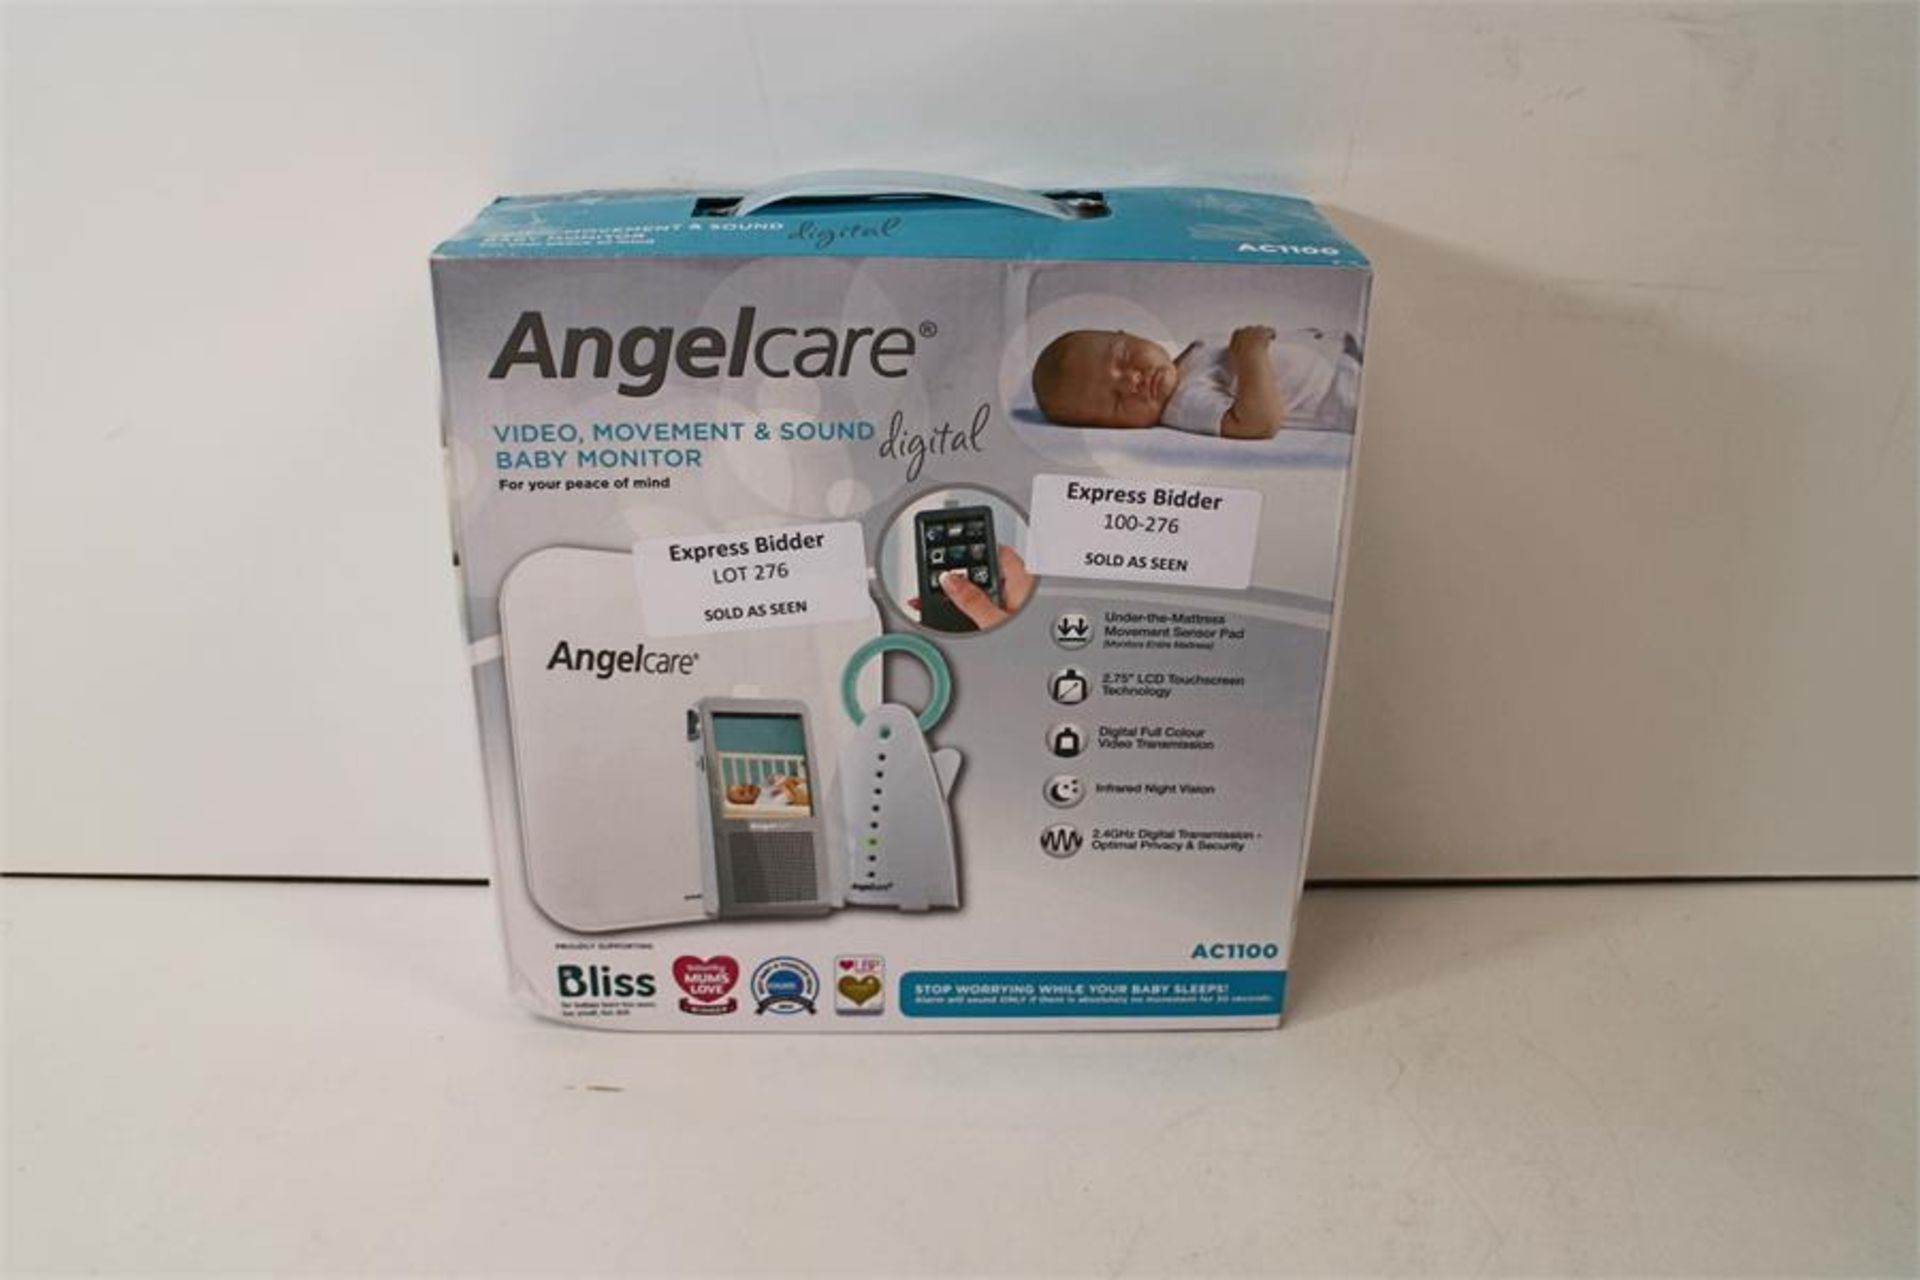 Angelcare AC1100 Digital Video and Sound Baby Moni